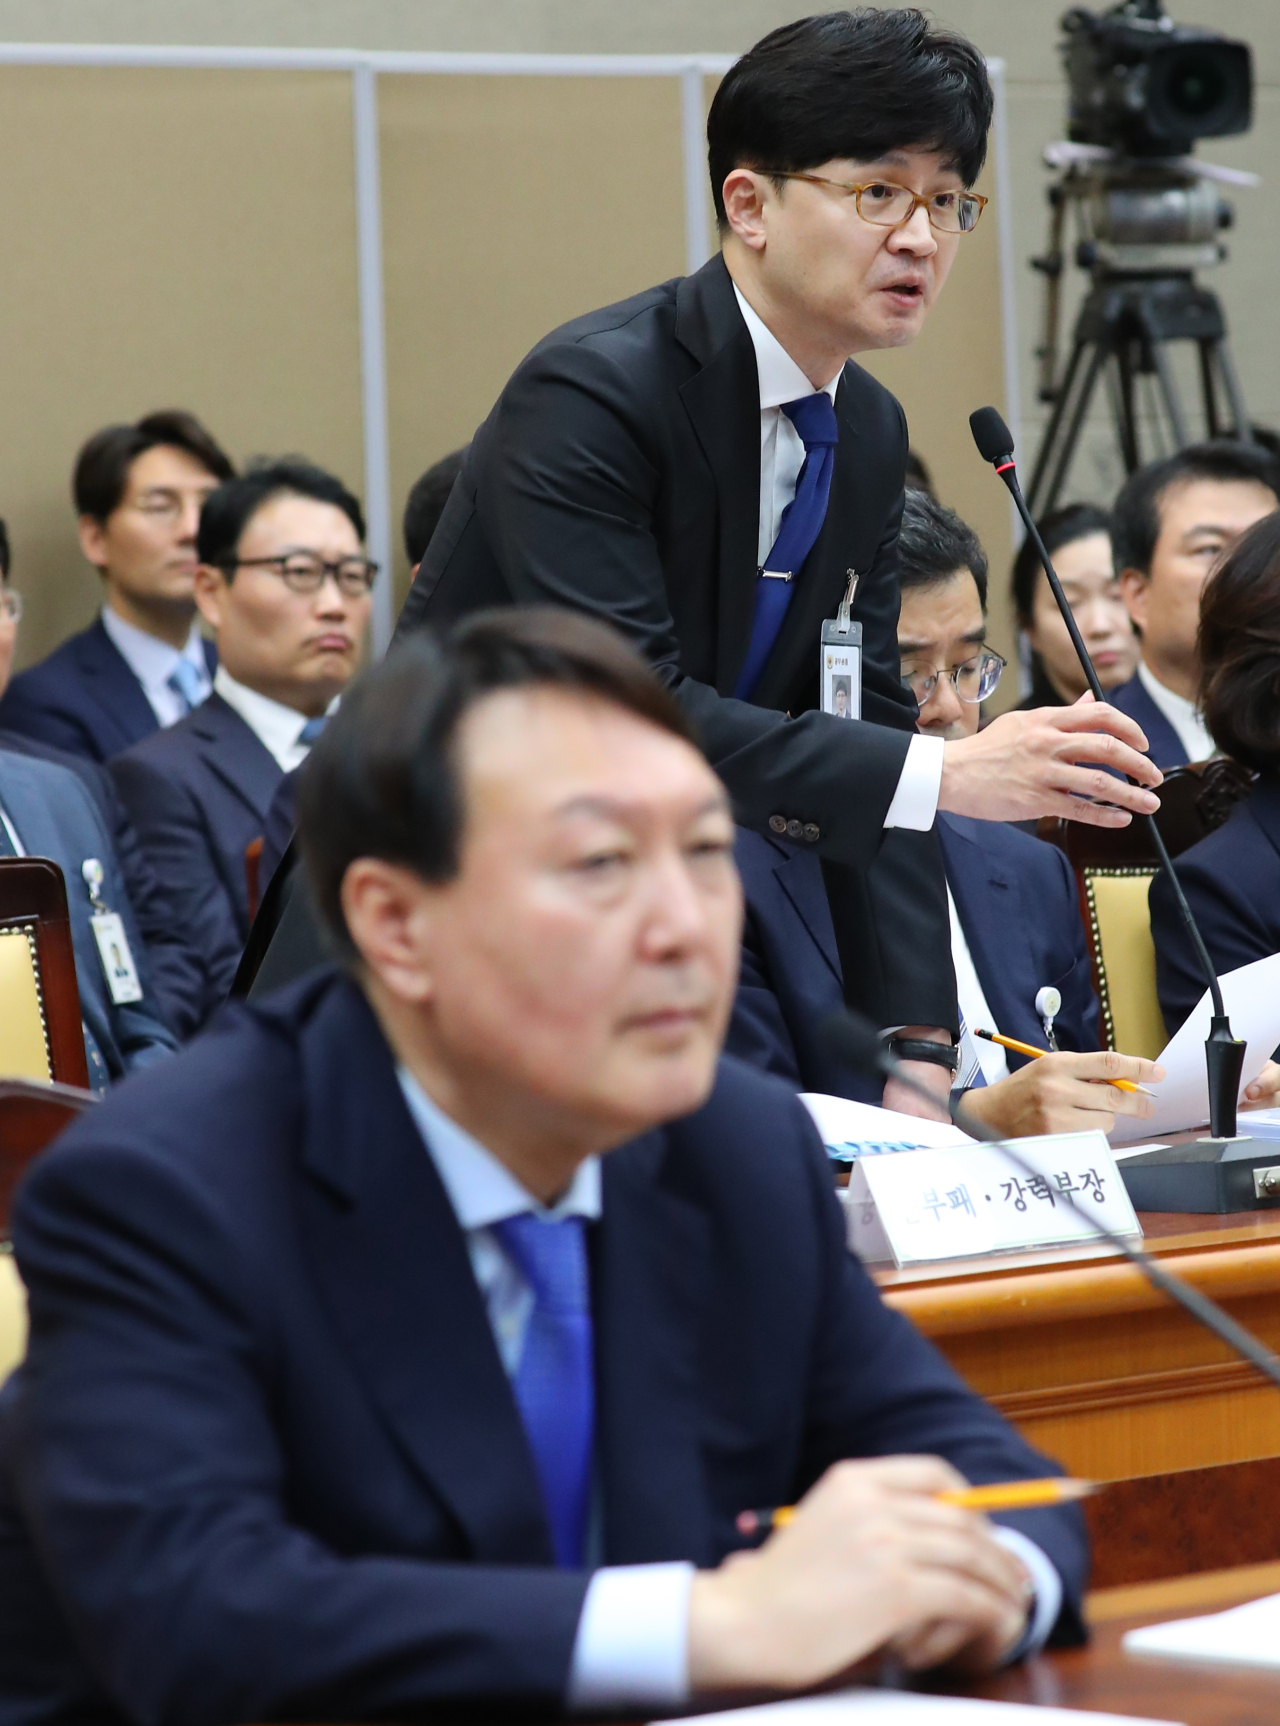 President-elect Yoon Suk-yeol (front) and Justice Minister nominee Han Dong-hoon attend a parliamentary inspection on Oct. 17, 2019, when they were Prosecutor General and director of the anti-corruption department at the Supreme Prosecutors’ Office, respectively. (Yonhap)